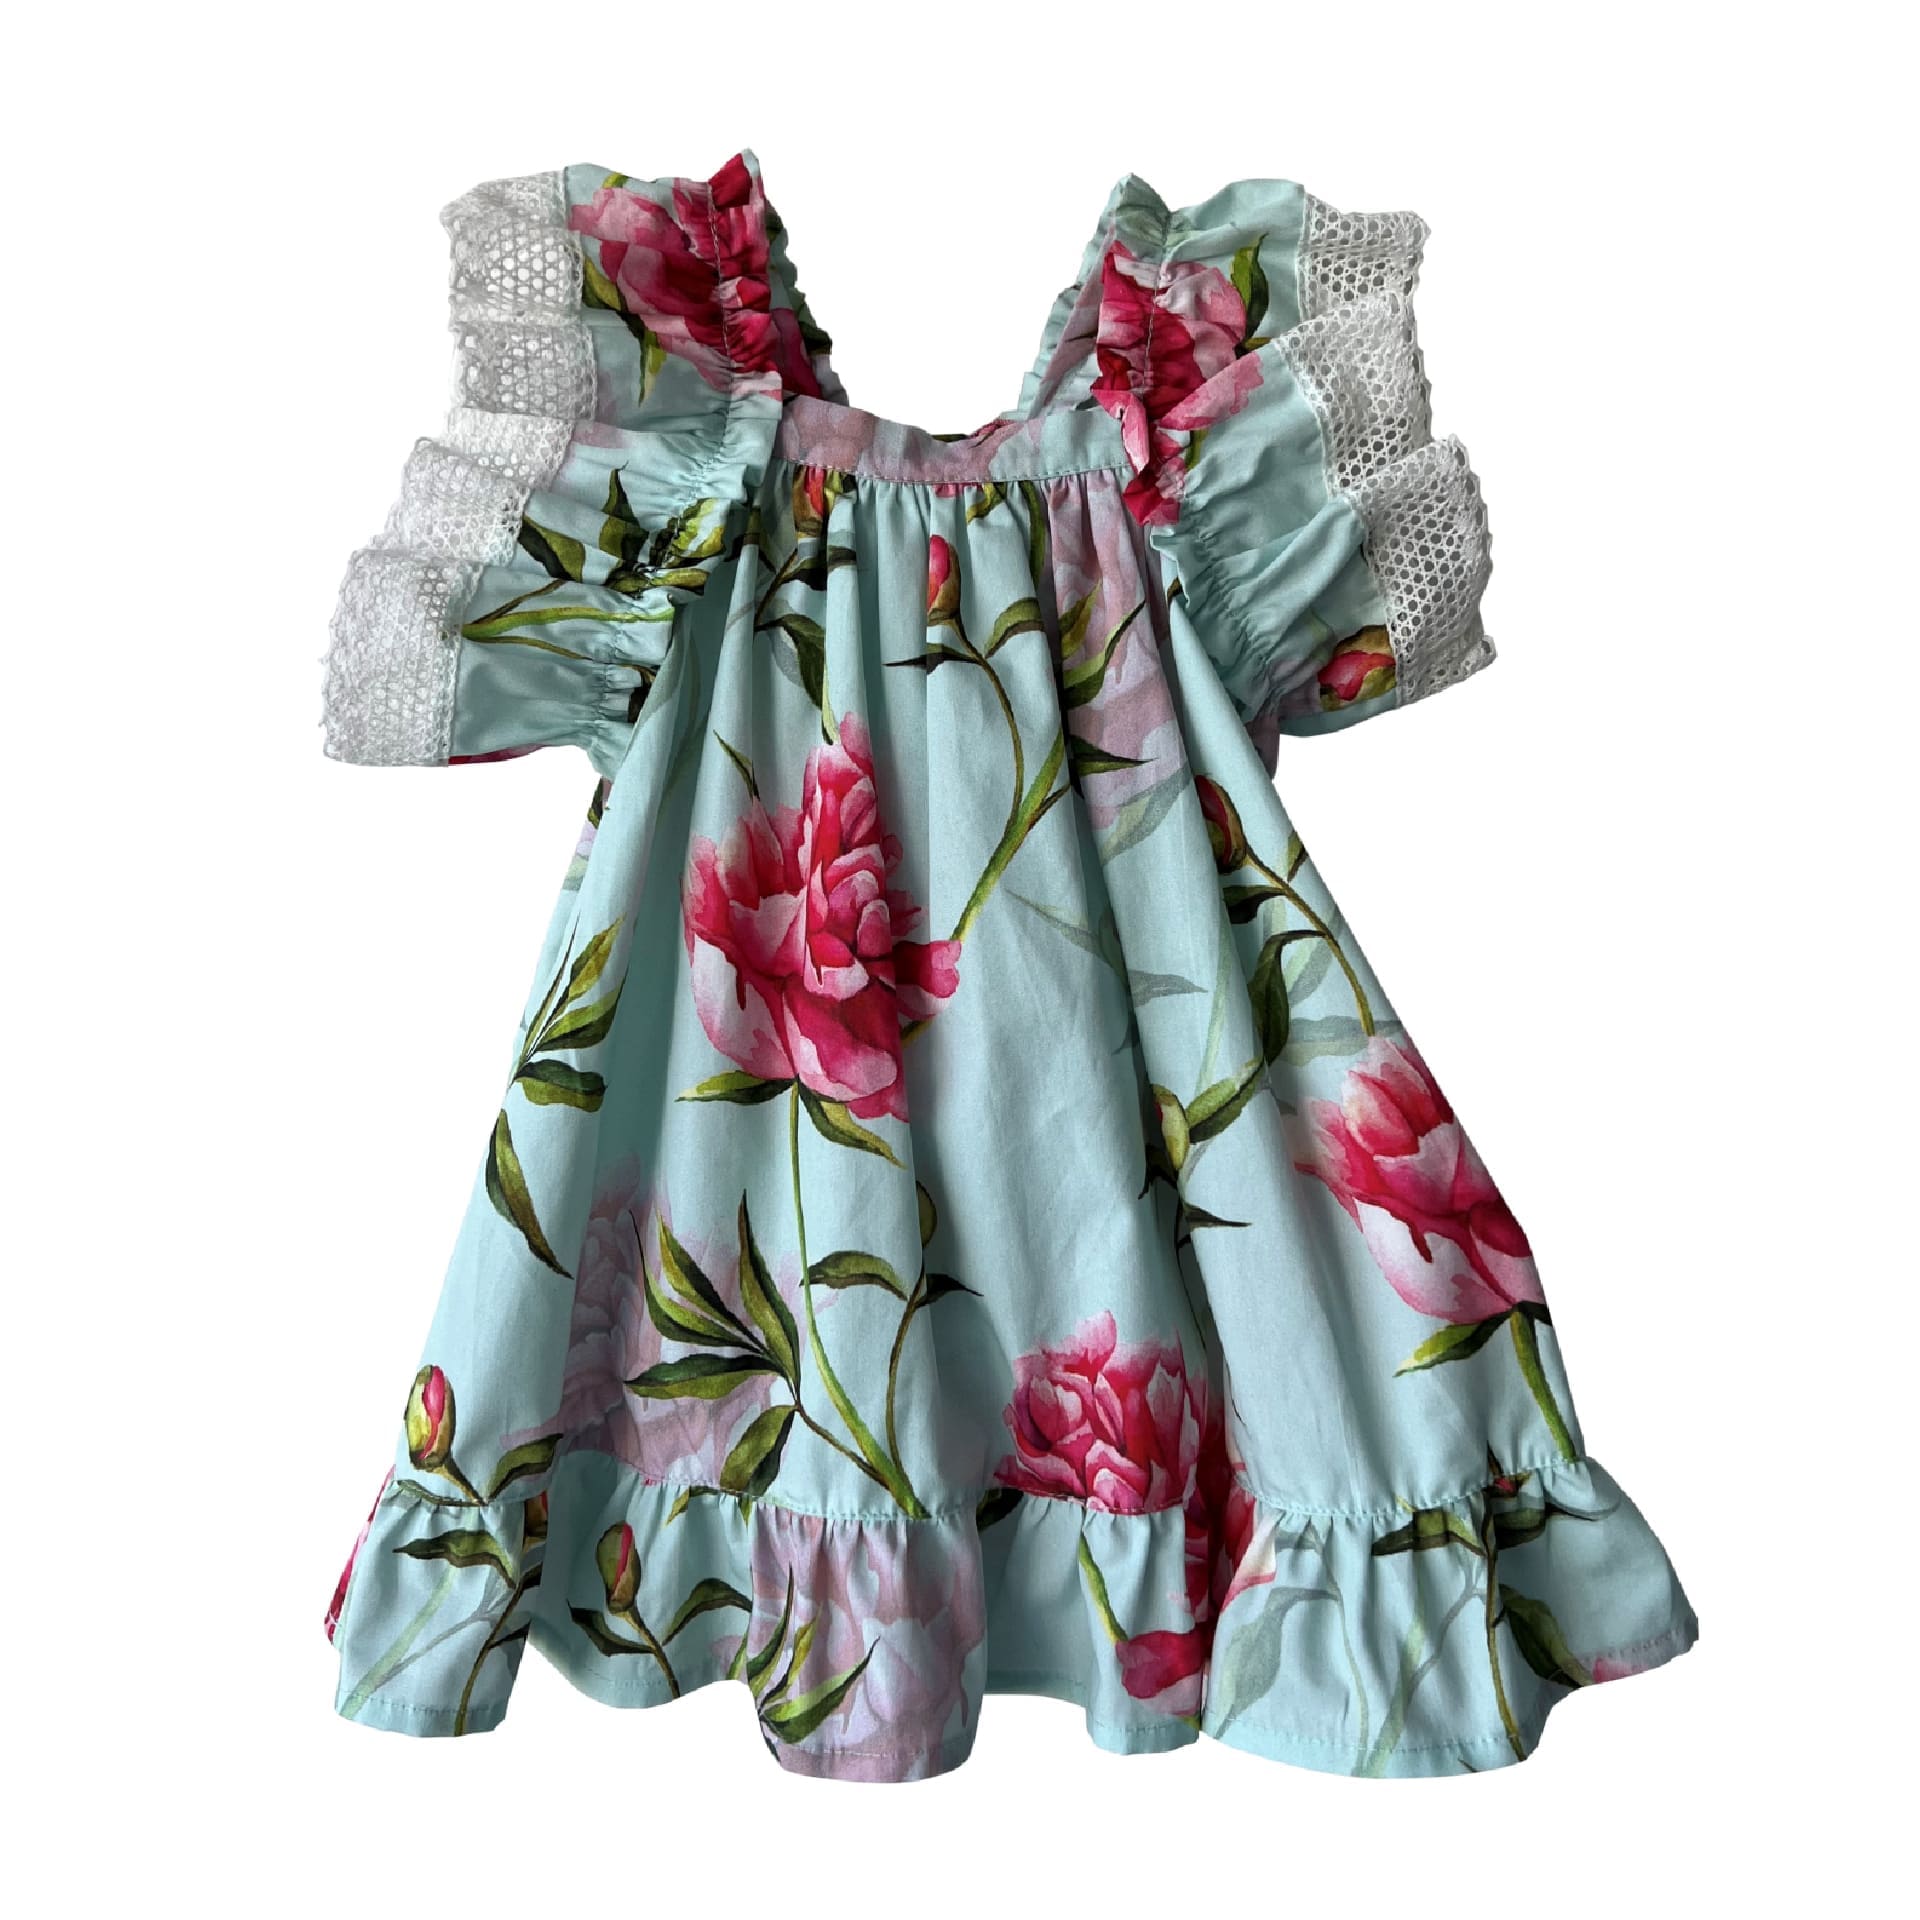 Mint with pink flowers dress